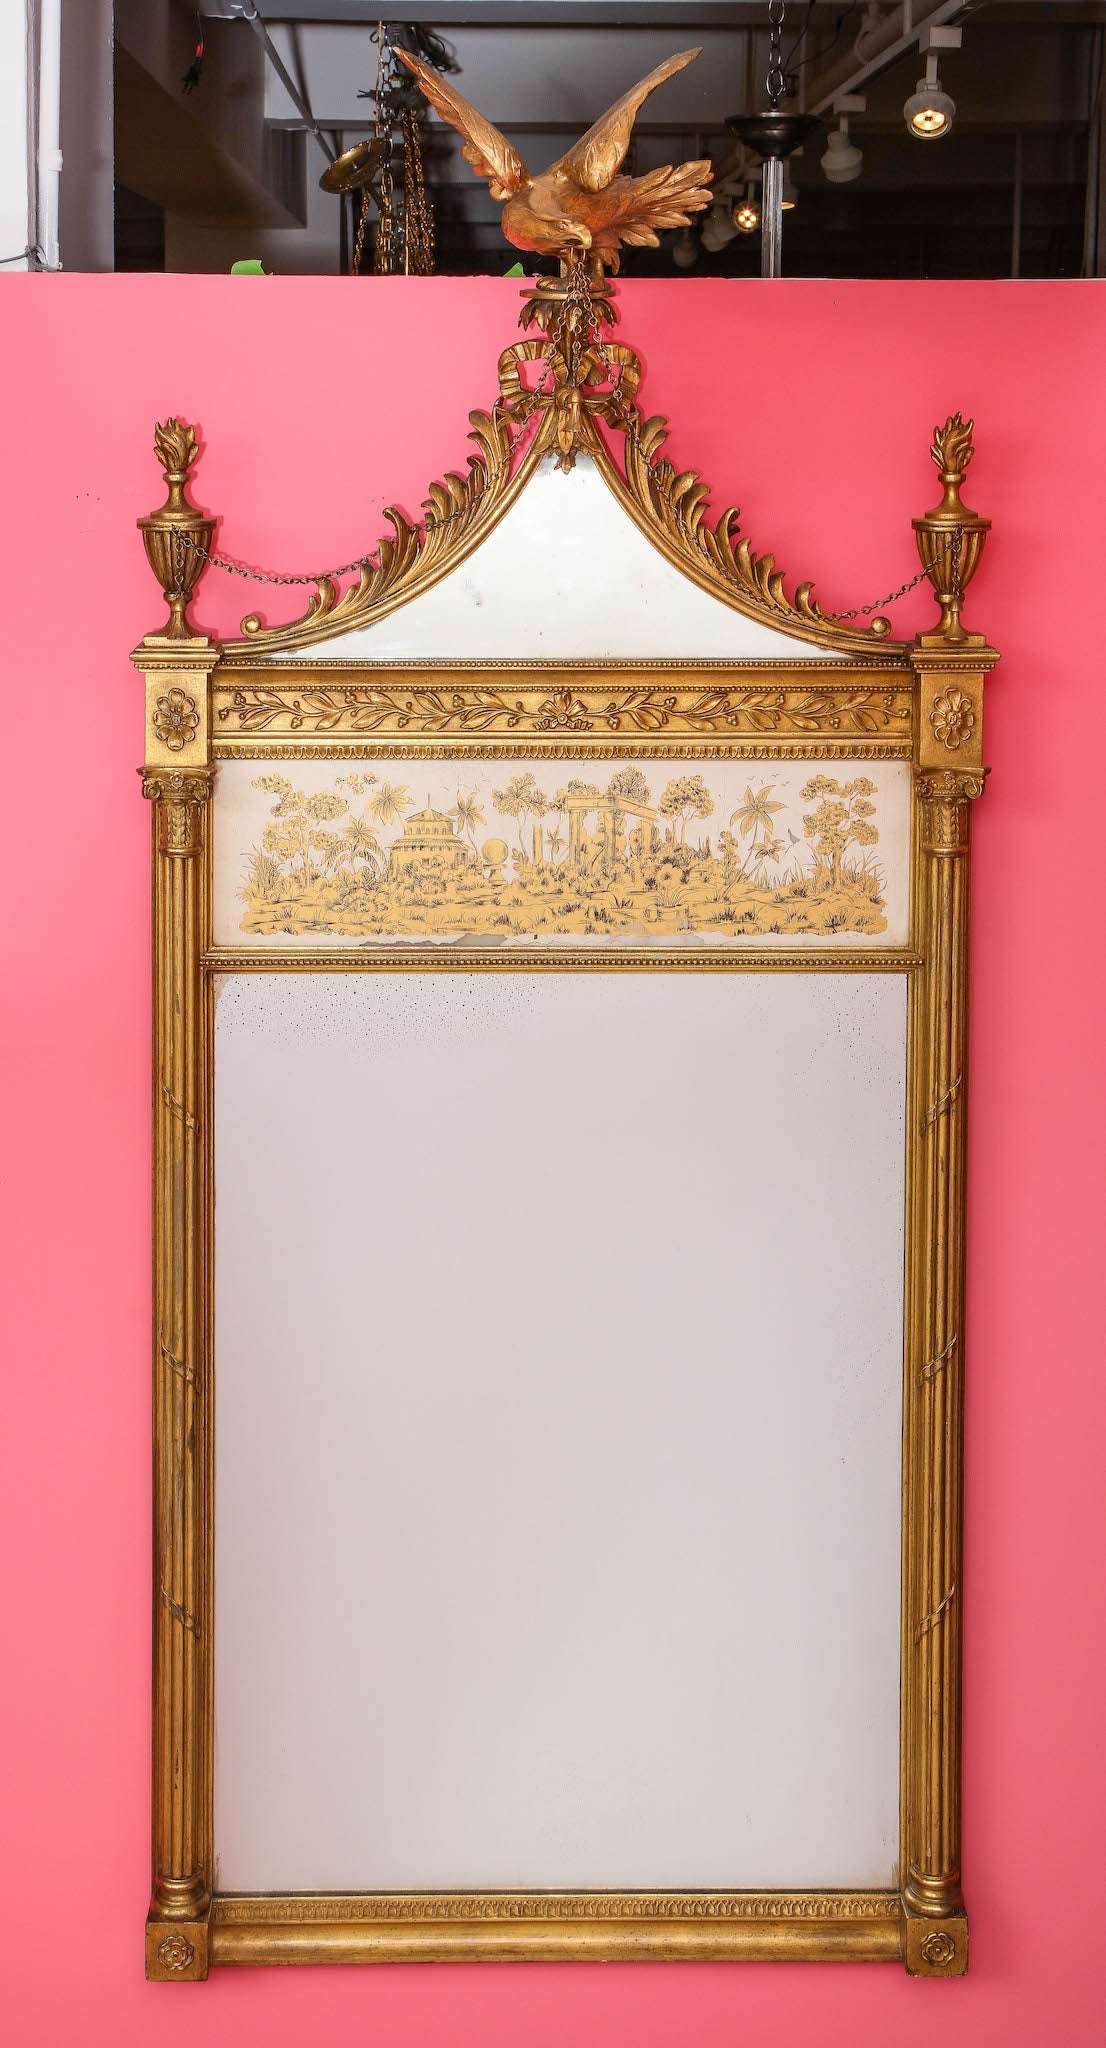 Neoclassical-style-mirror-with-verre-eglomise-panel-1